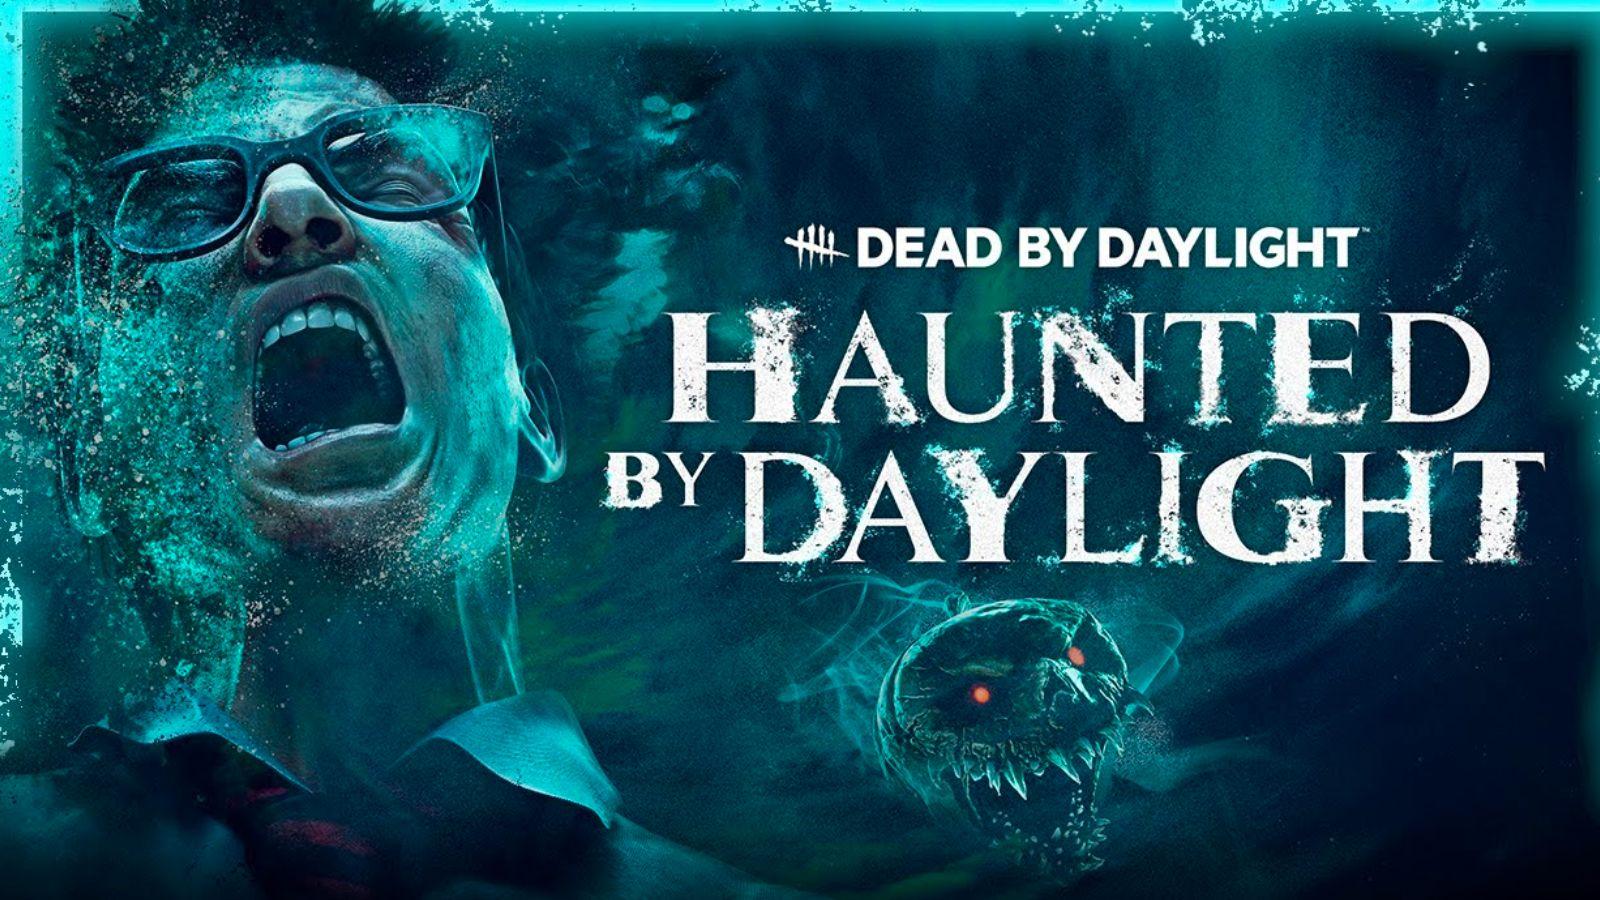 Haunted by Daylight event